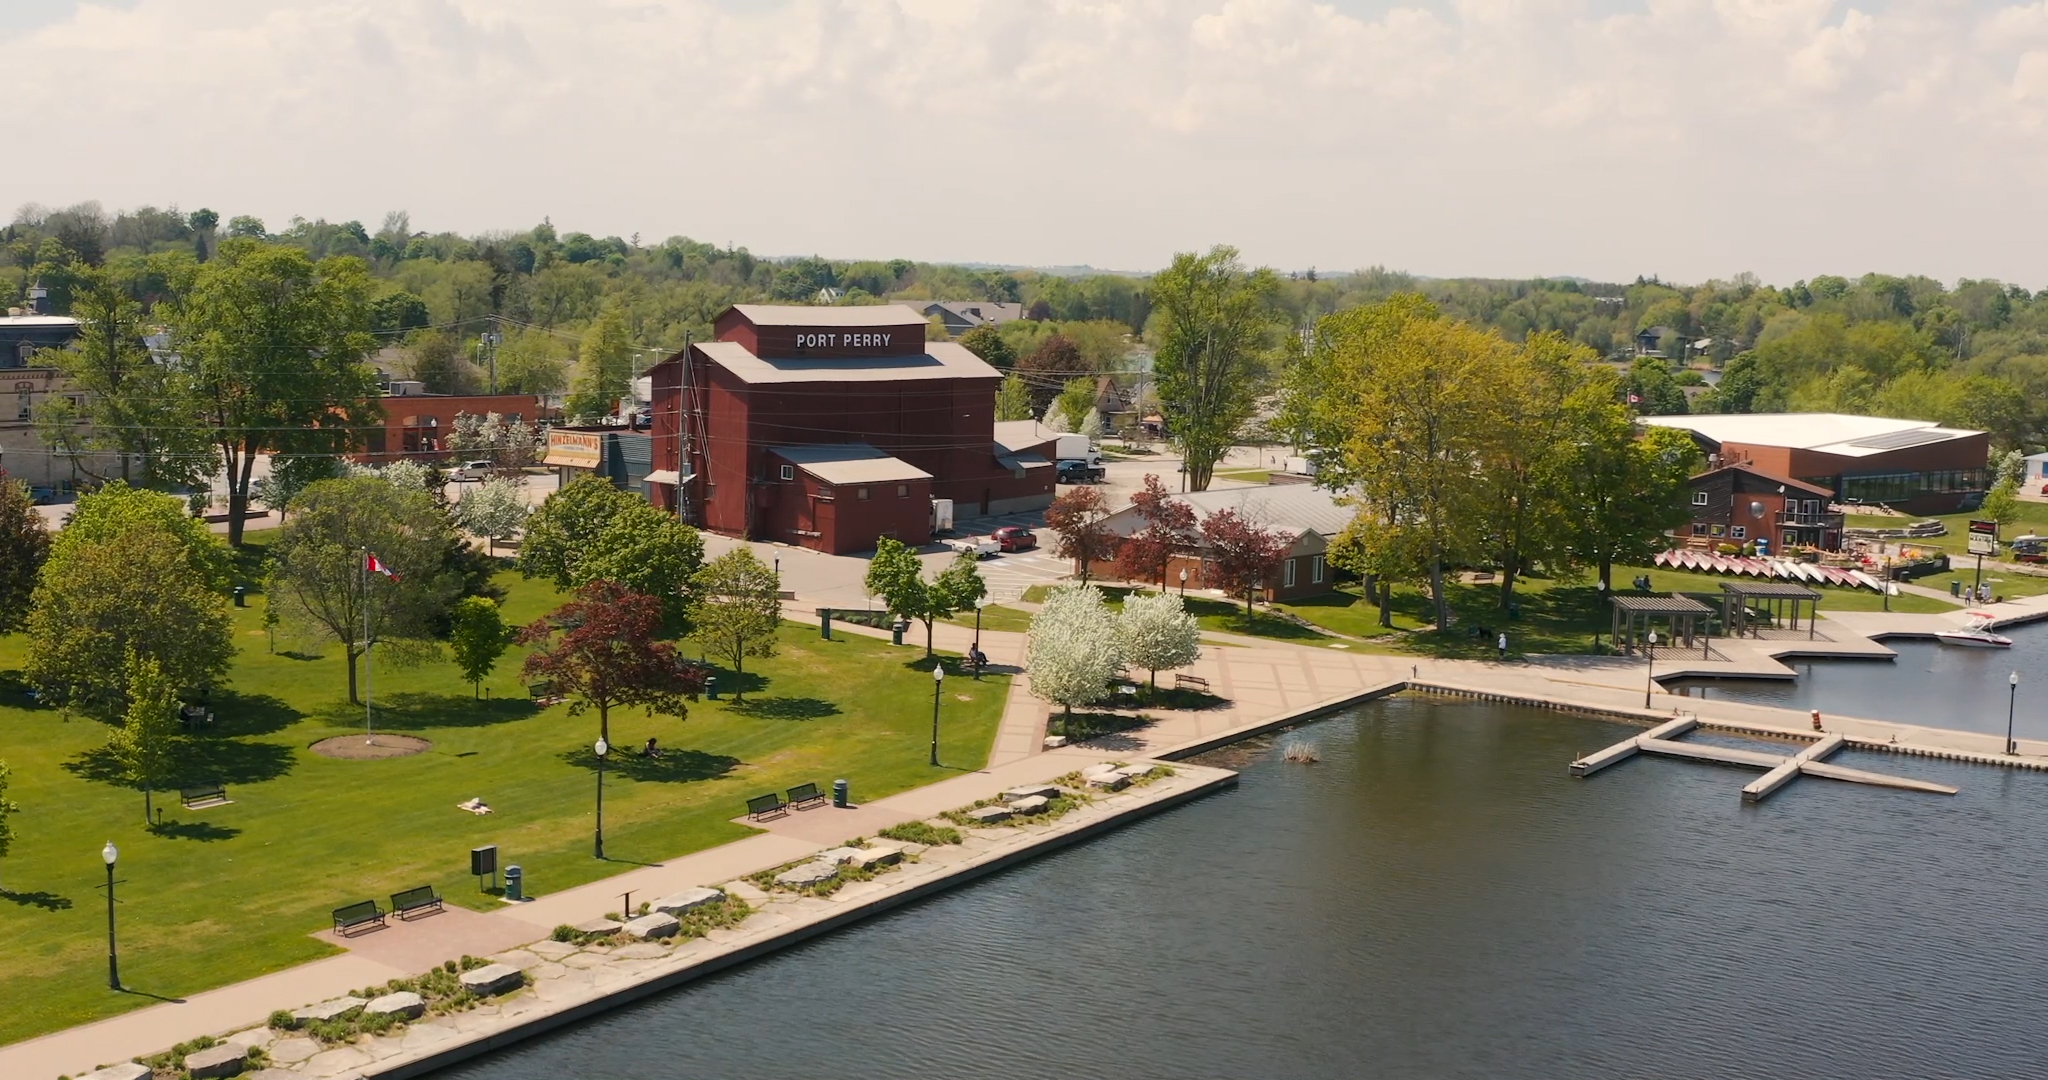 Ariel image of Downtown Port Perry with the waterfront and Old Mill